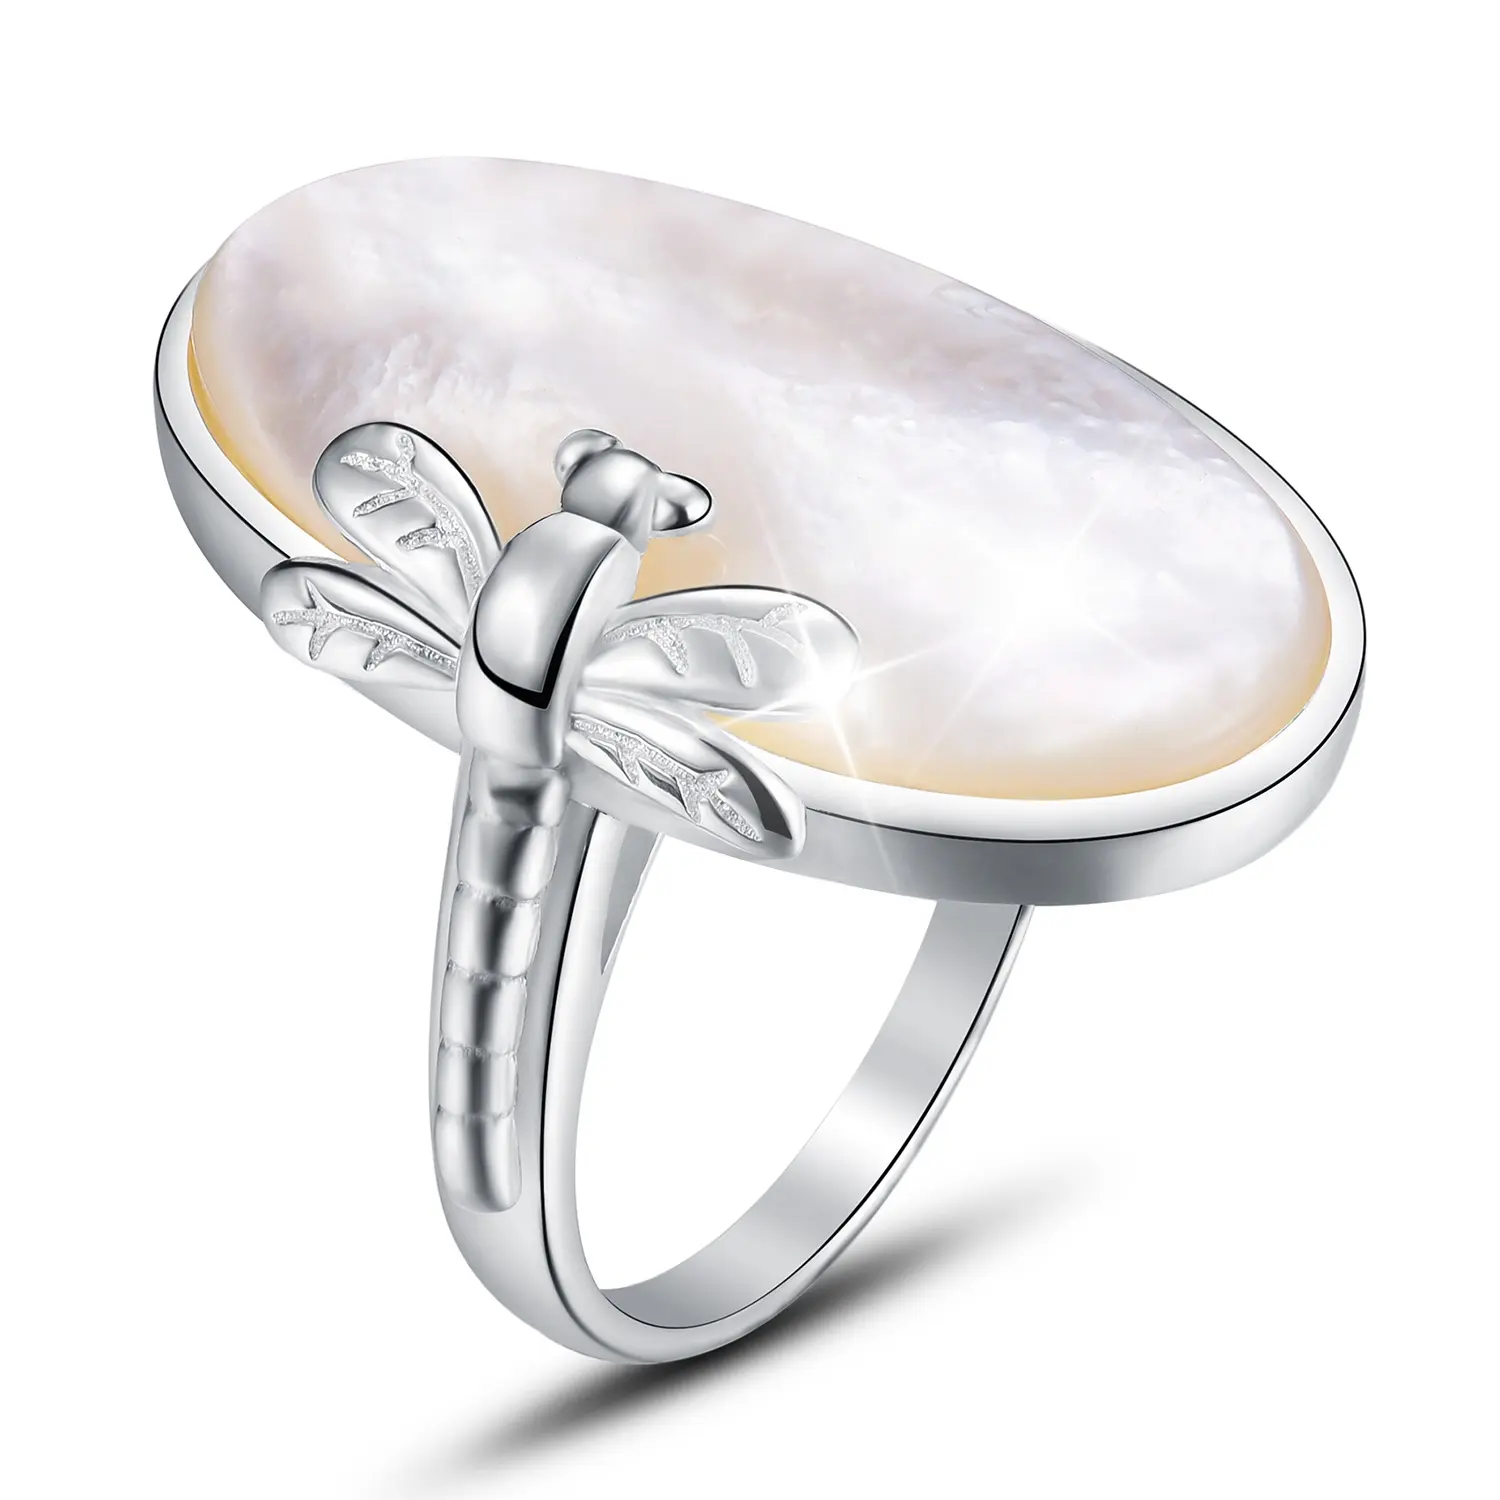 Real 925 Sterling Silver Rings Vintage Long Natural Stone Handmade For Women Fashion Jewelry